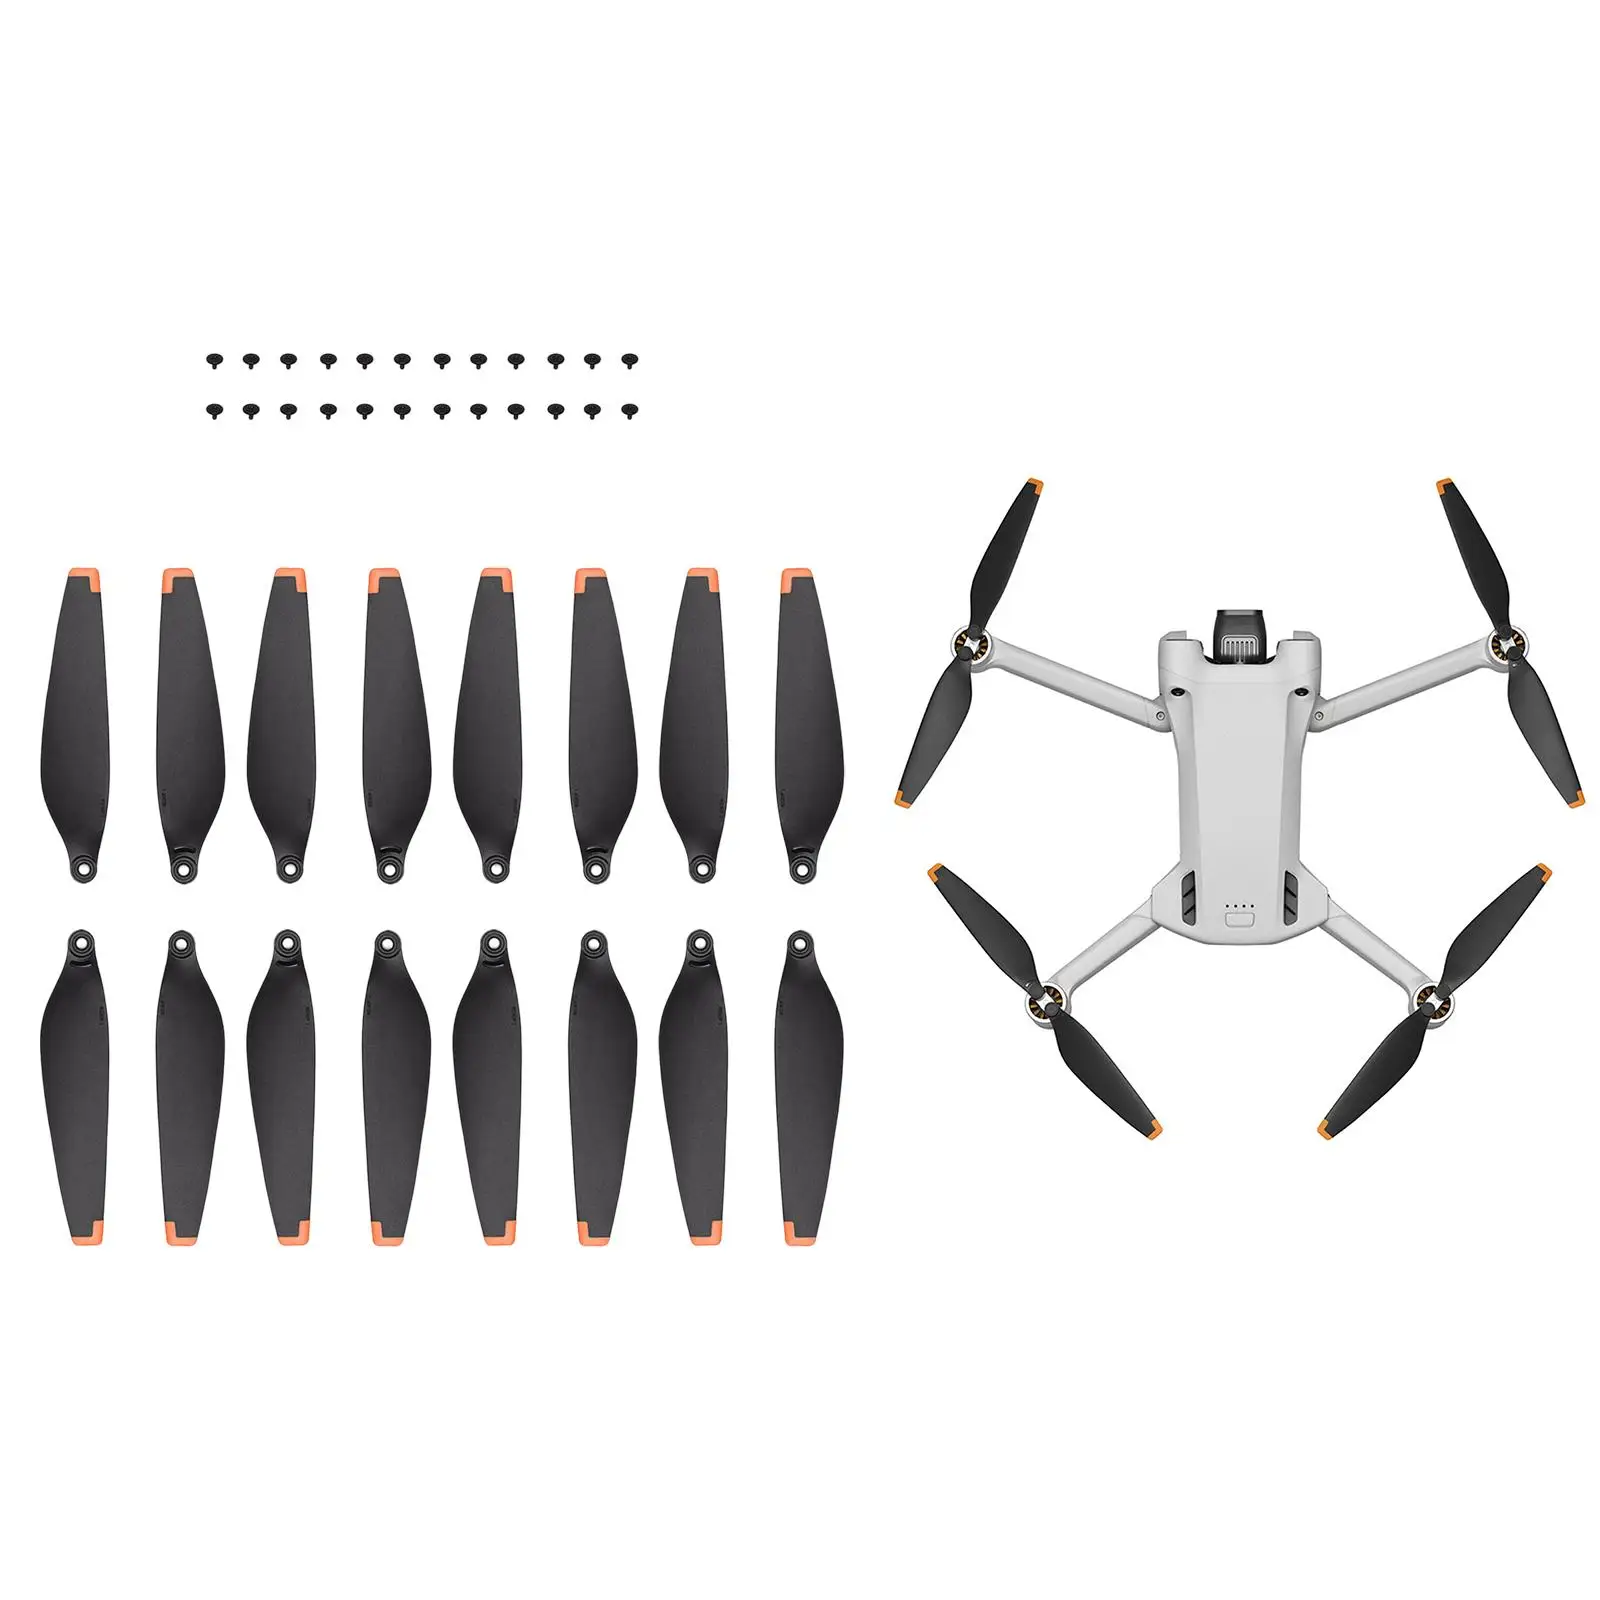 Propellers for Mavic Mini 3 Pro Light in Weight Silent Flight Stable Momentum Low Noise Aircraft Propellers Orange Tip